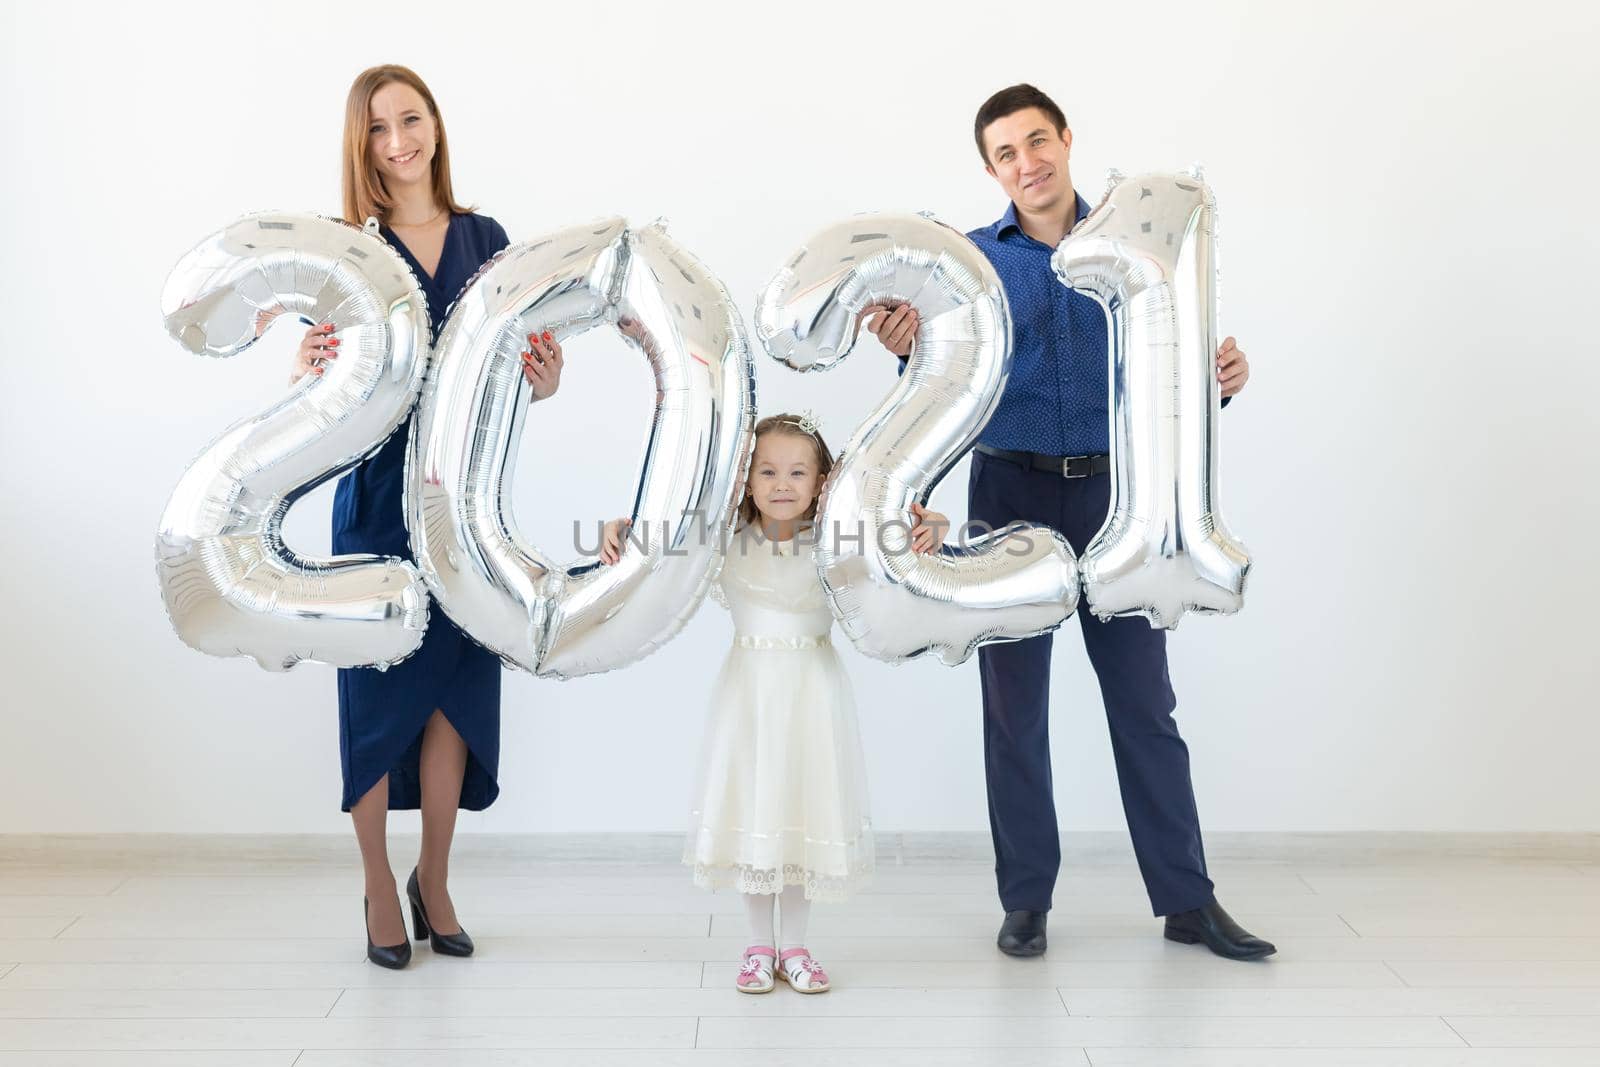 Young happy family mother and father and daughter standing near balloons shaped like numbers 2021 on white background. New year, Christmas and holiday.